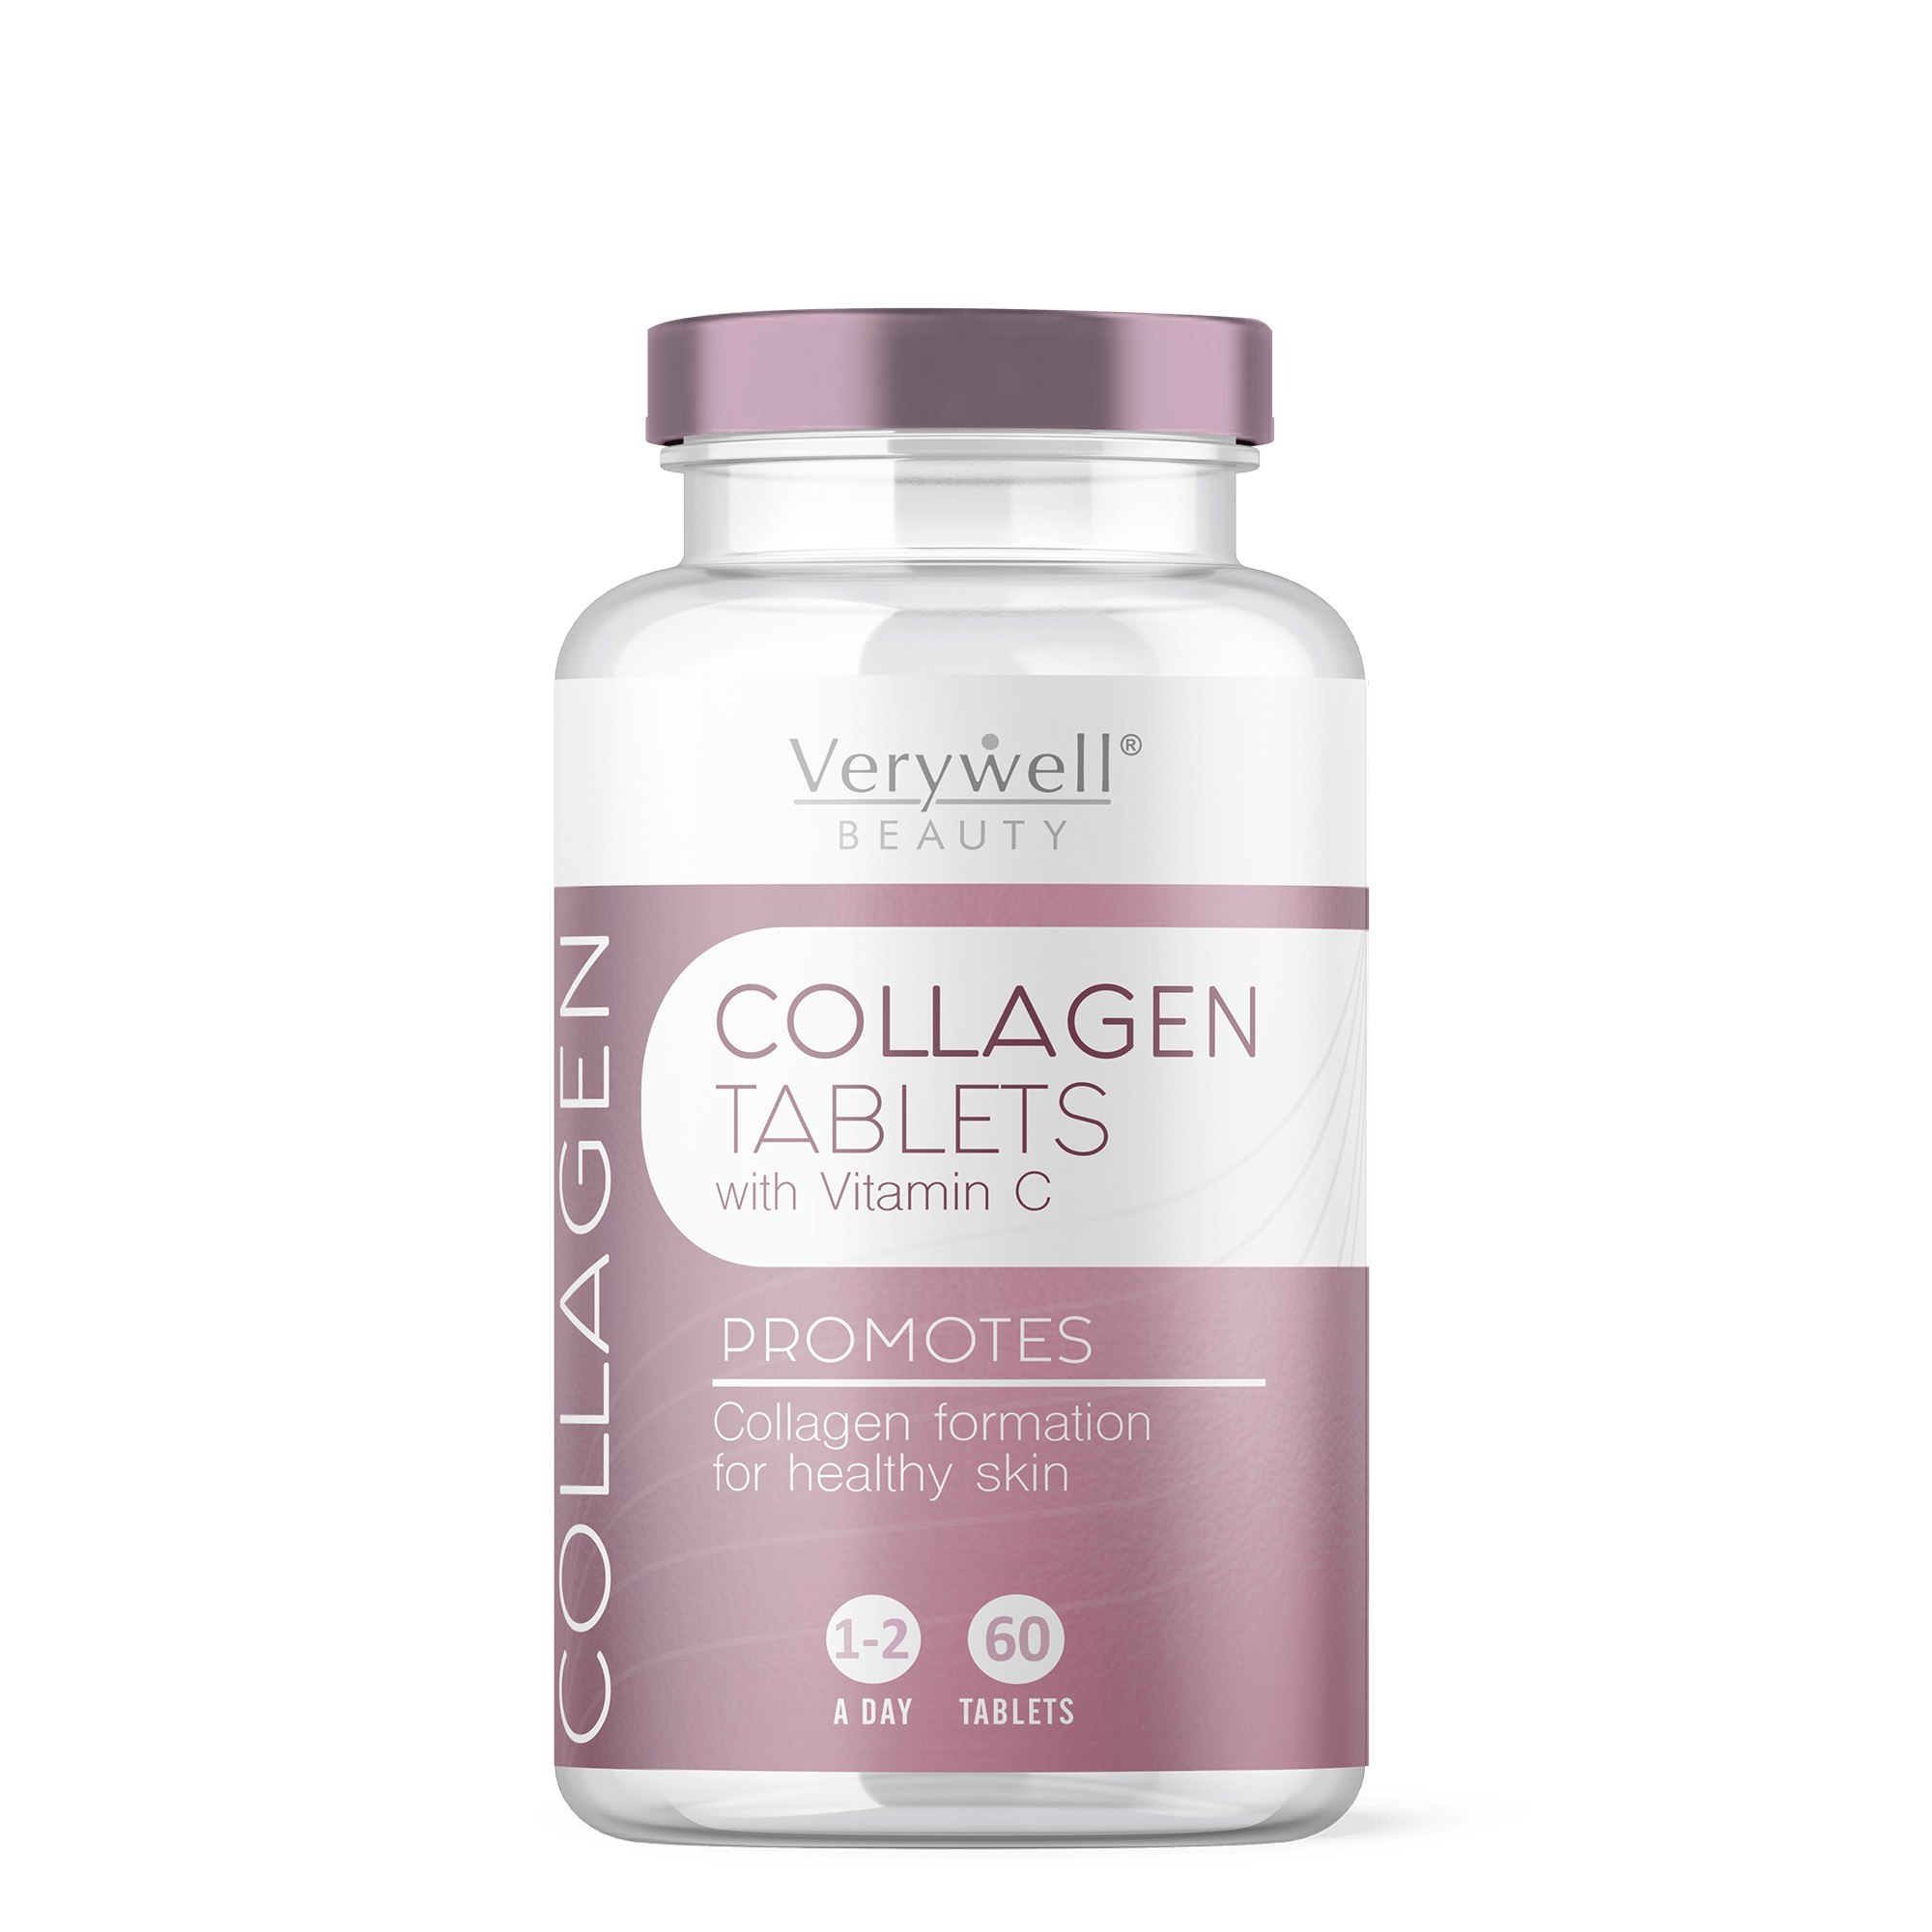 BEAUTYCOLLAGEN TABLETSDISCOVER MORE